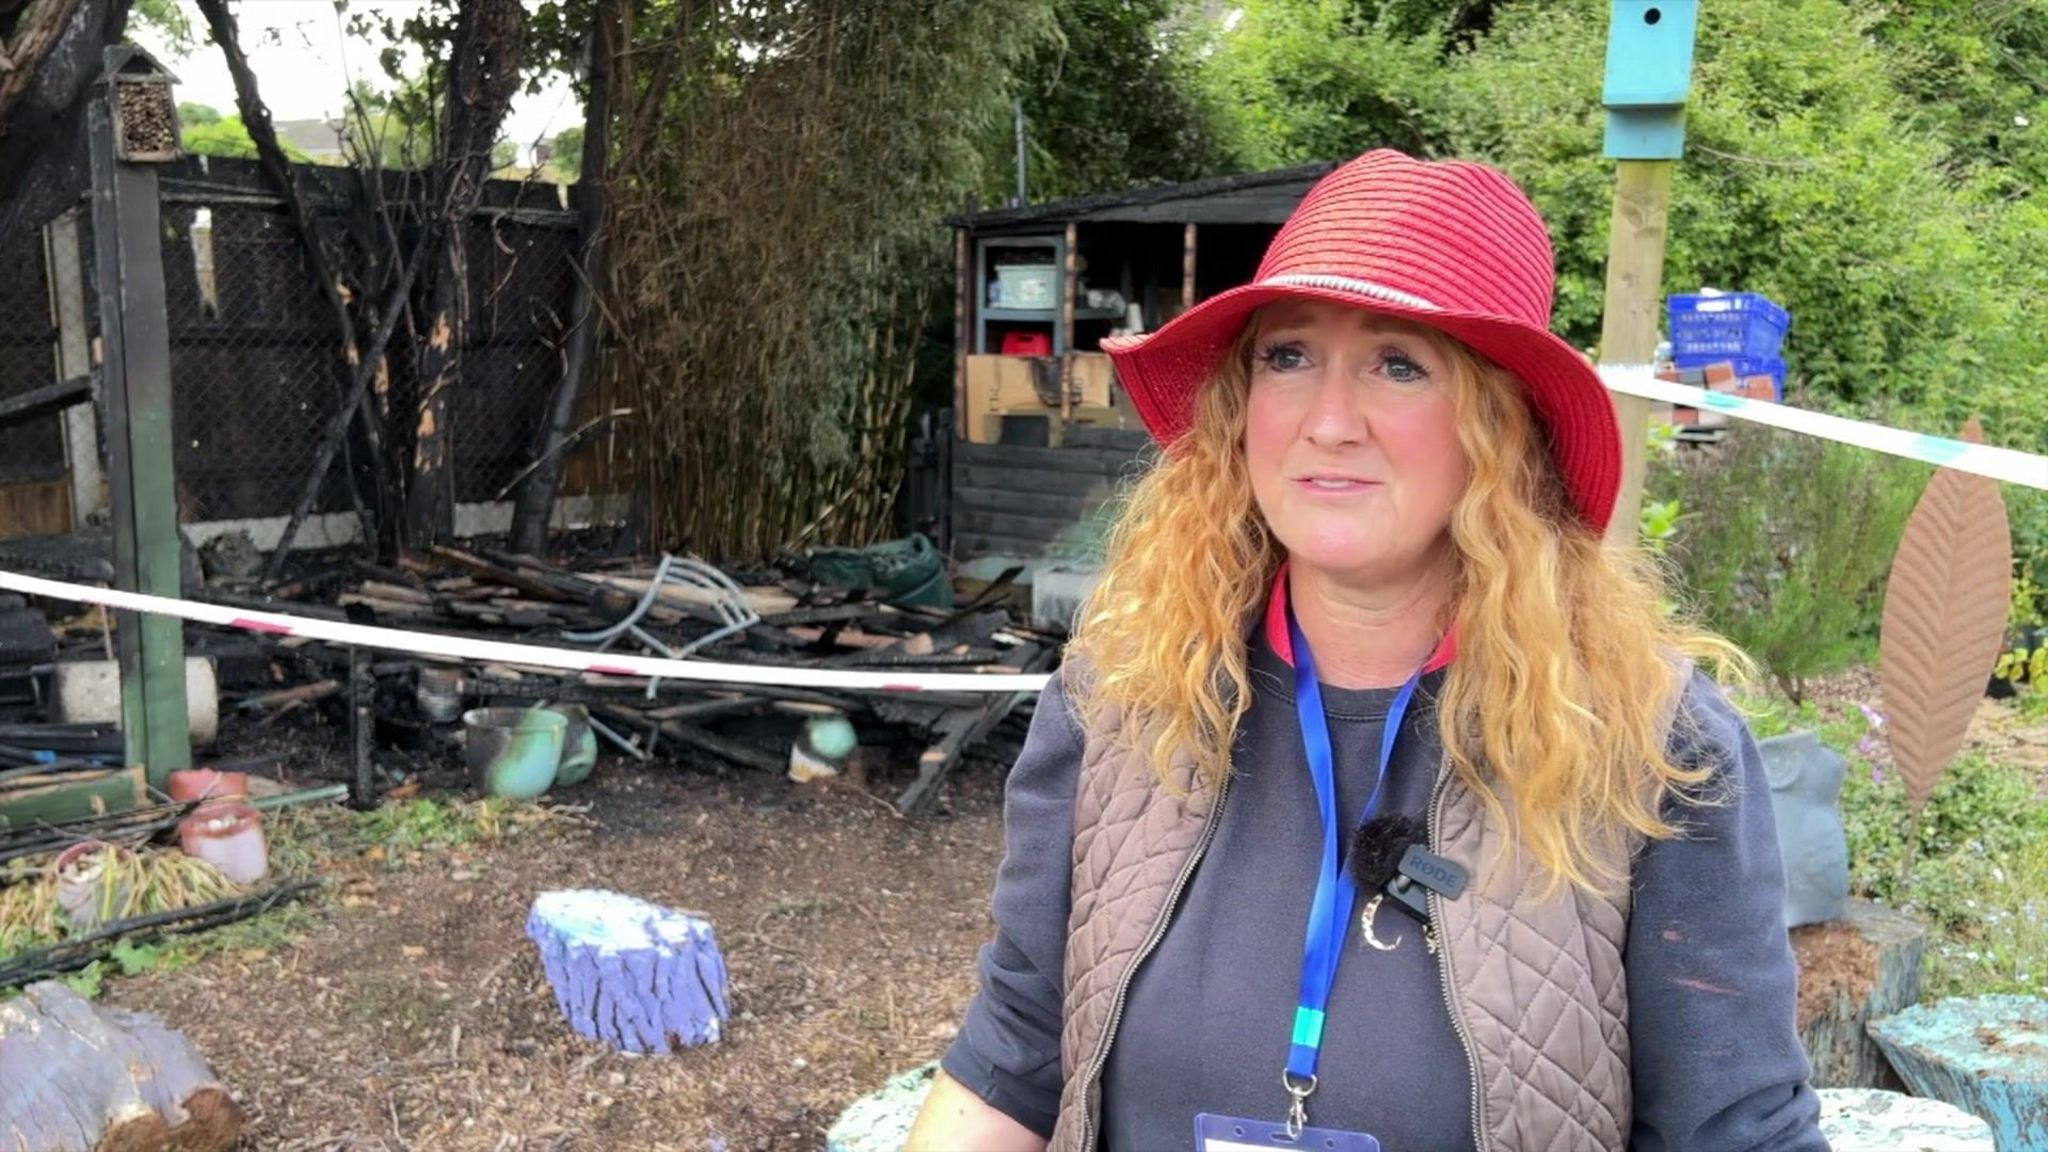 Catherine Waters-Clark wearing a red had stood in front of the burnt remains of some garden furniture.